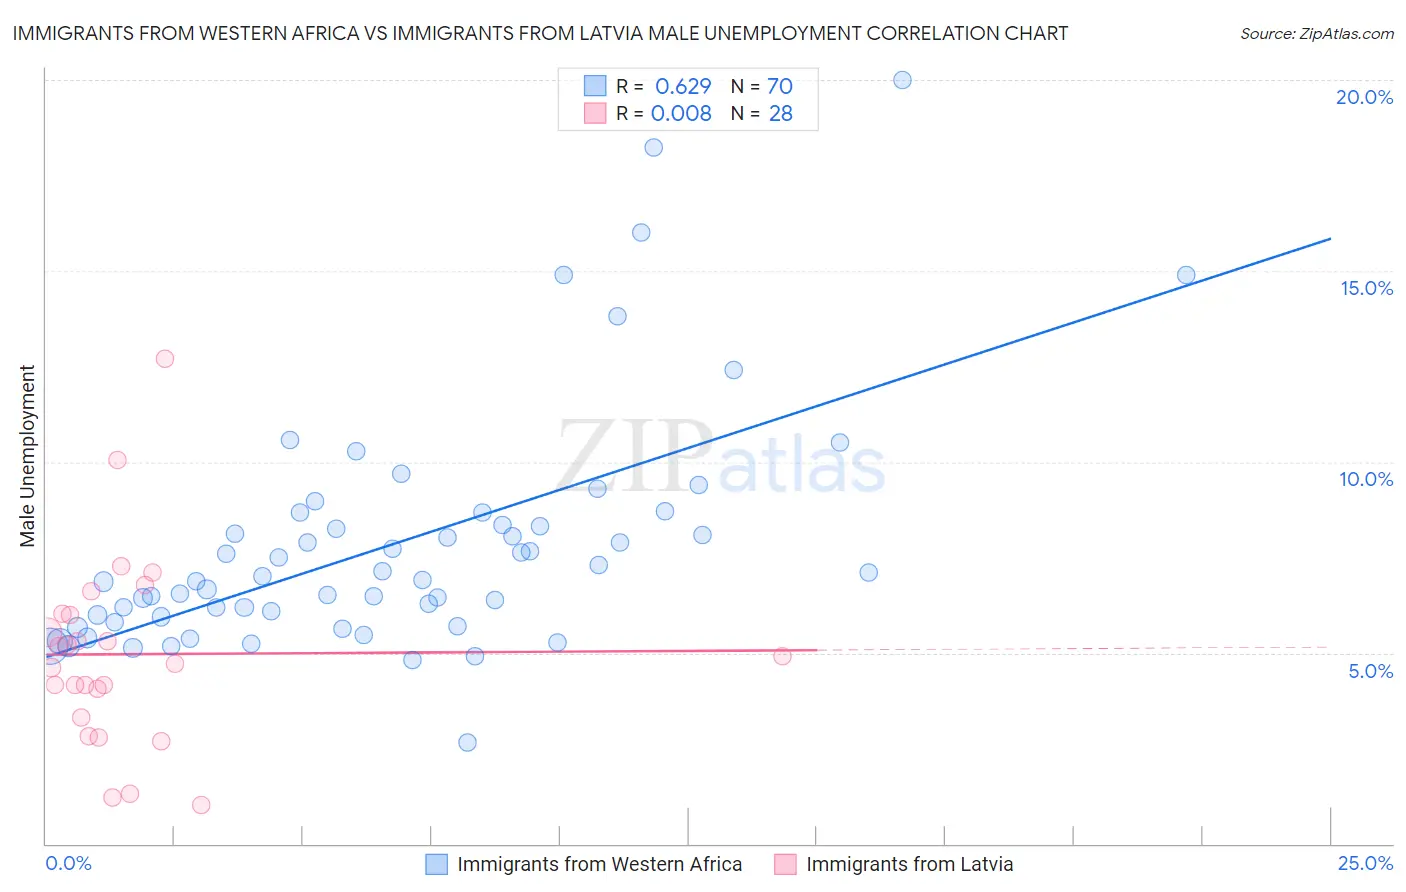 Immigrants from Western Africa vs Immigrants from Latvia Male Unemployment